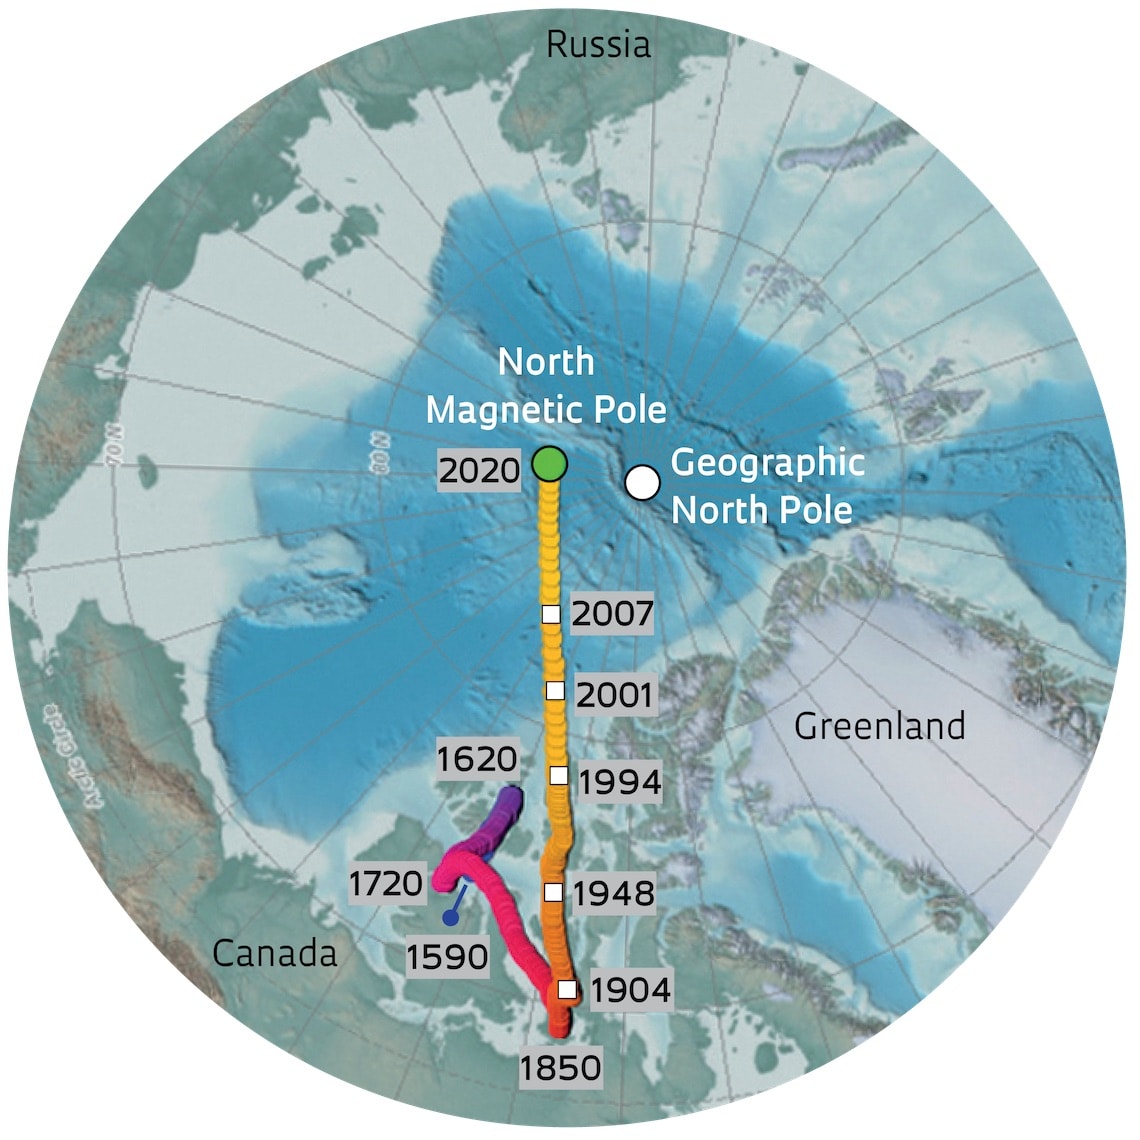 North Pole, Definition, Location, Explorers, & Facts